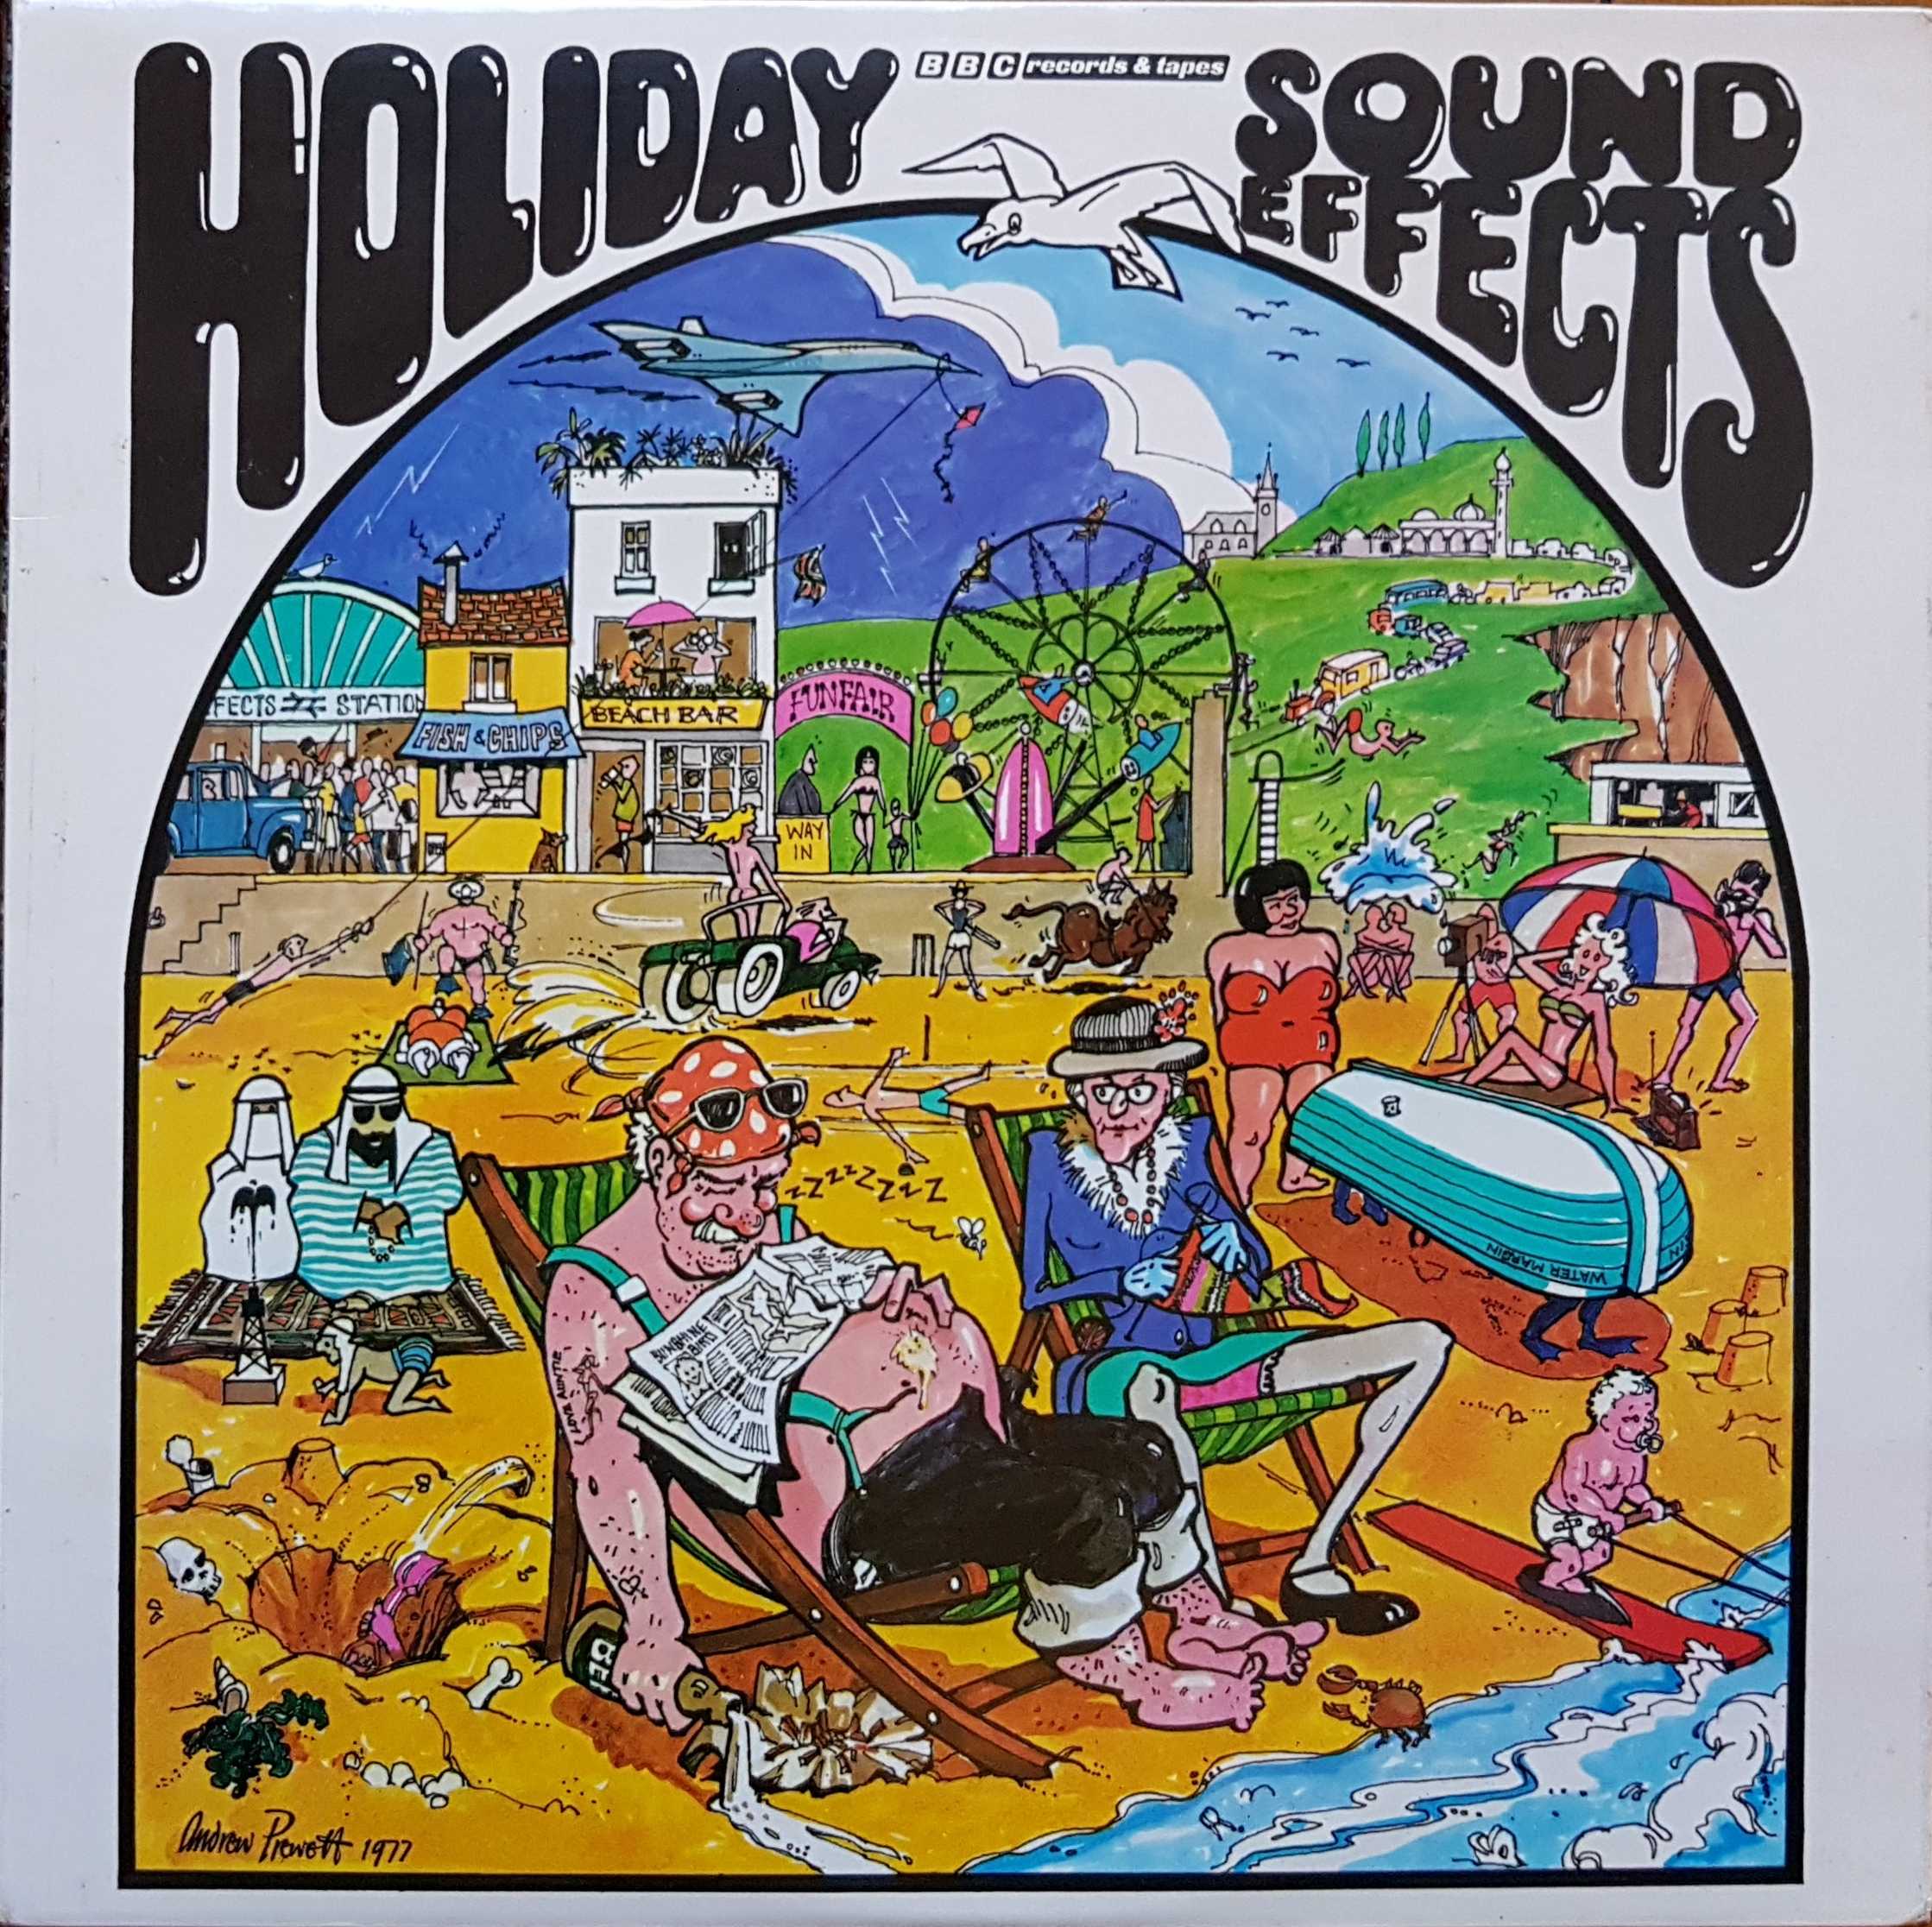 Picture of REC 301 Holiday sound effects by artist Various from the BBC albums - Records and Tapes library